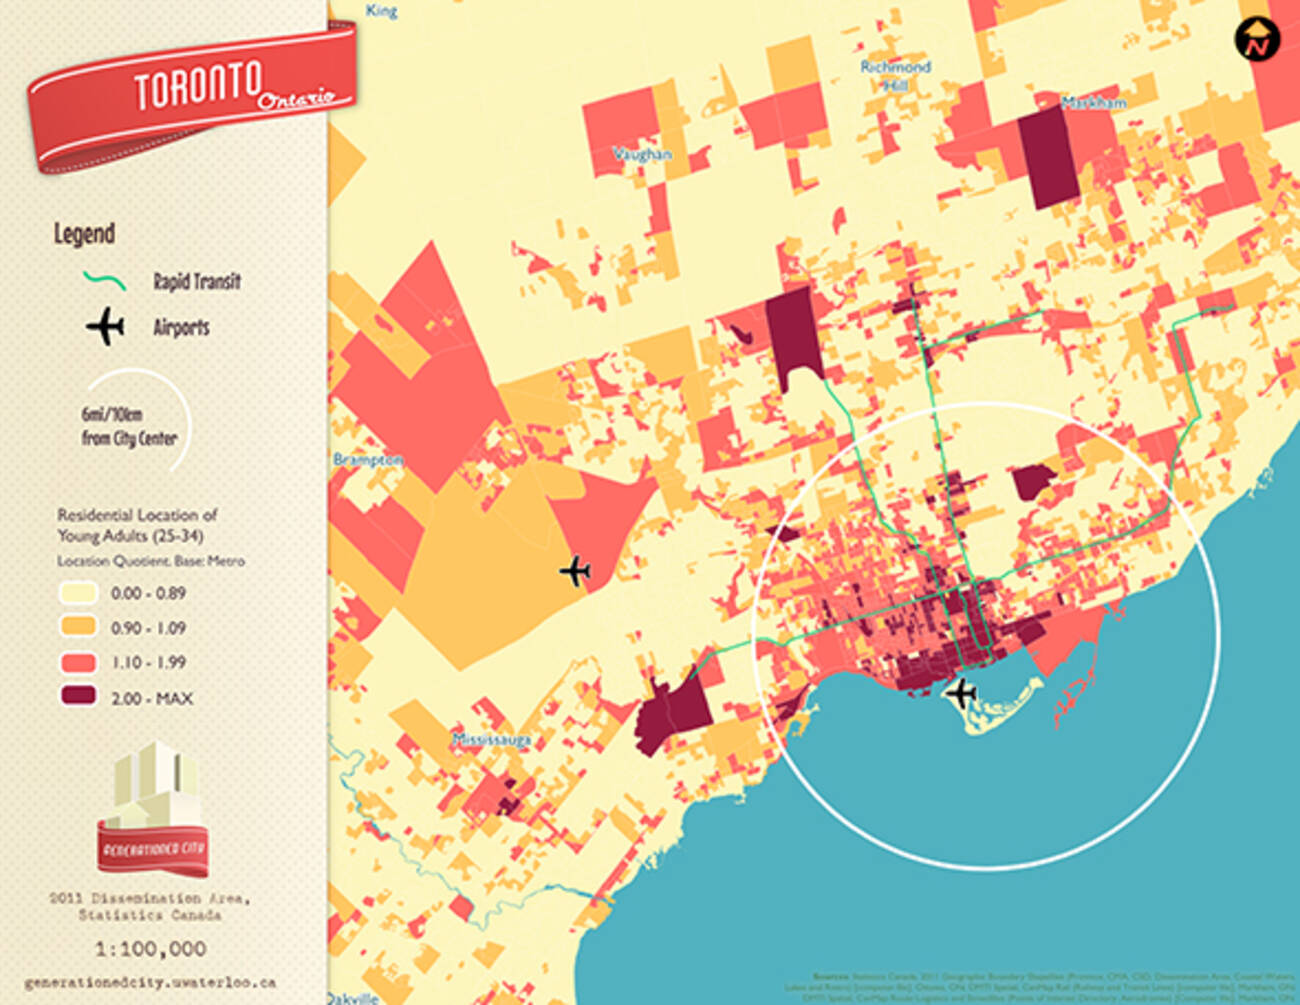 Where do young adults live in Toronto?